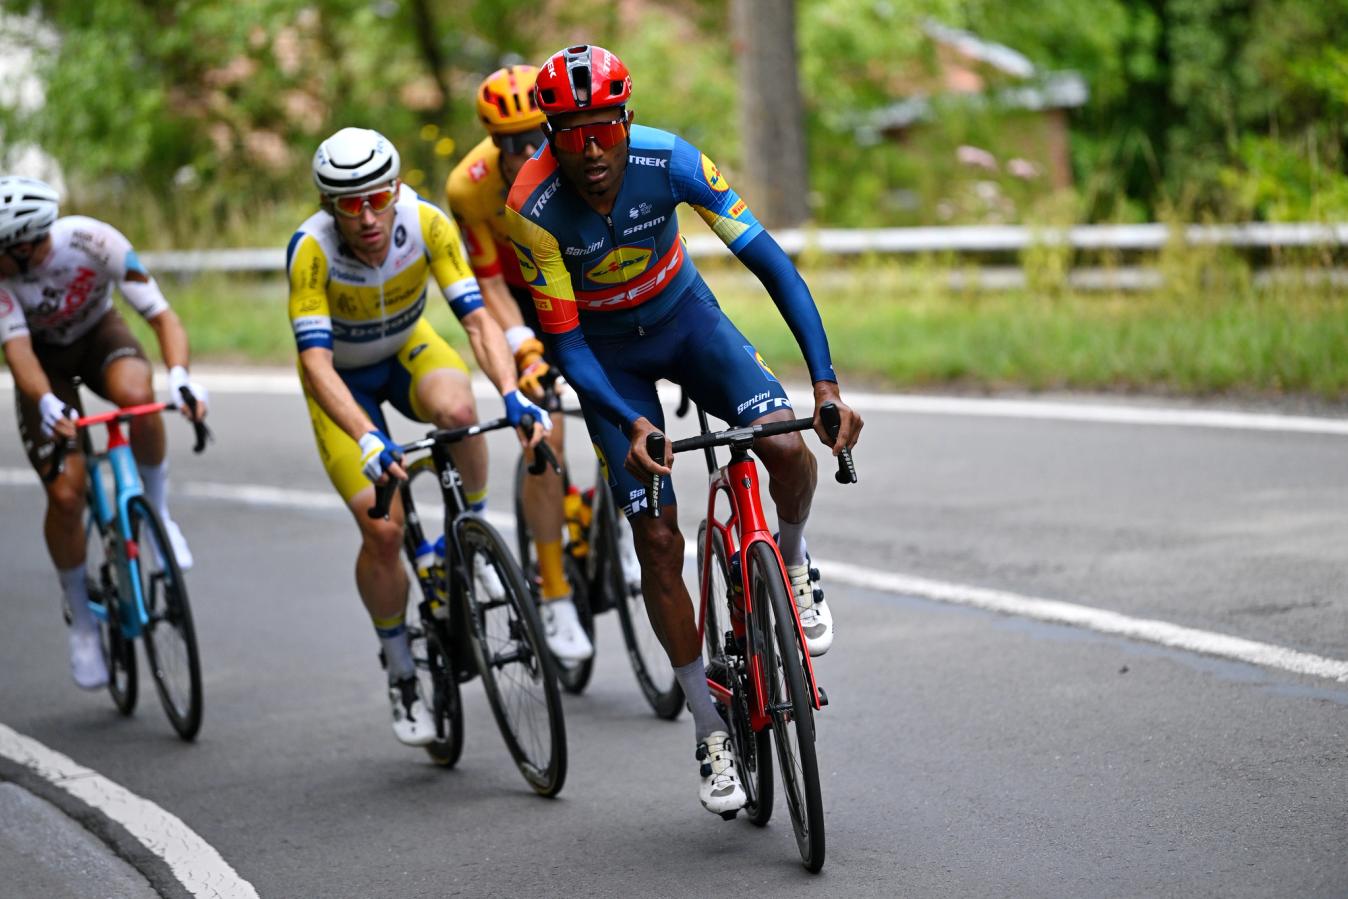 Amanuel Ghebreigzabhier of Lidl-Trek and Eritrea has suffered the same fate as teammate, Merhawi Kudus